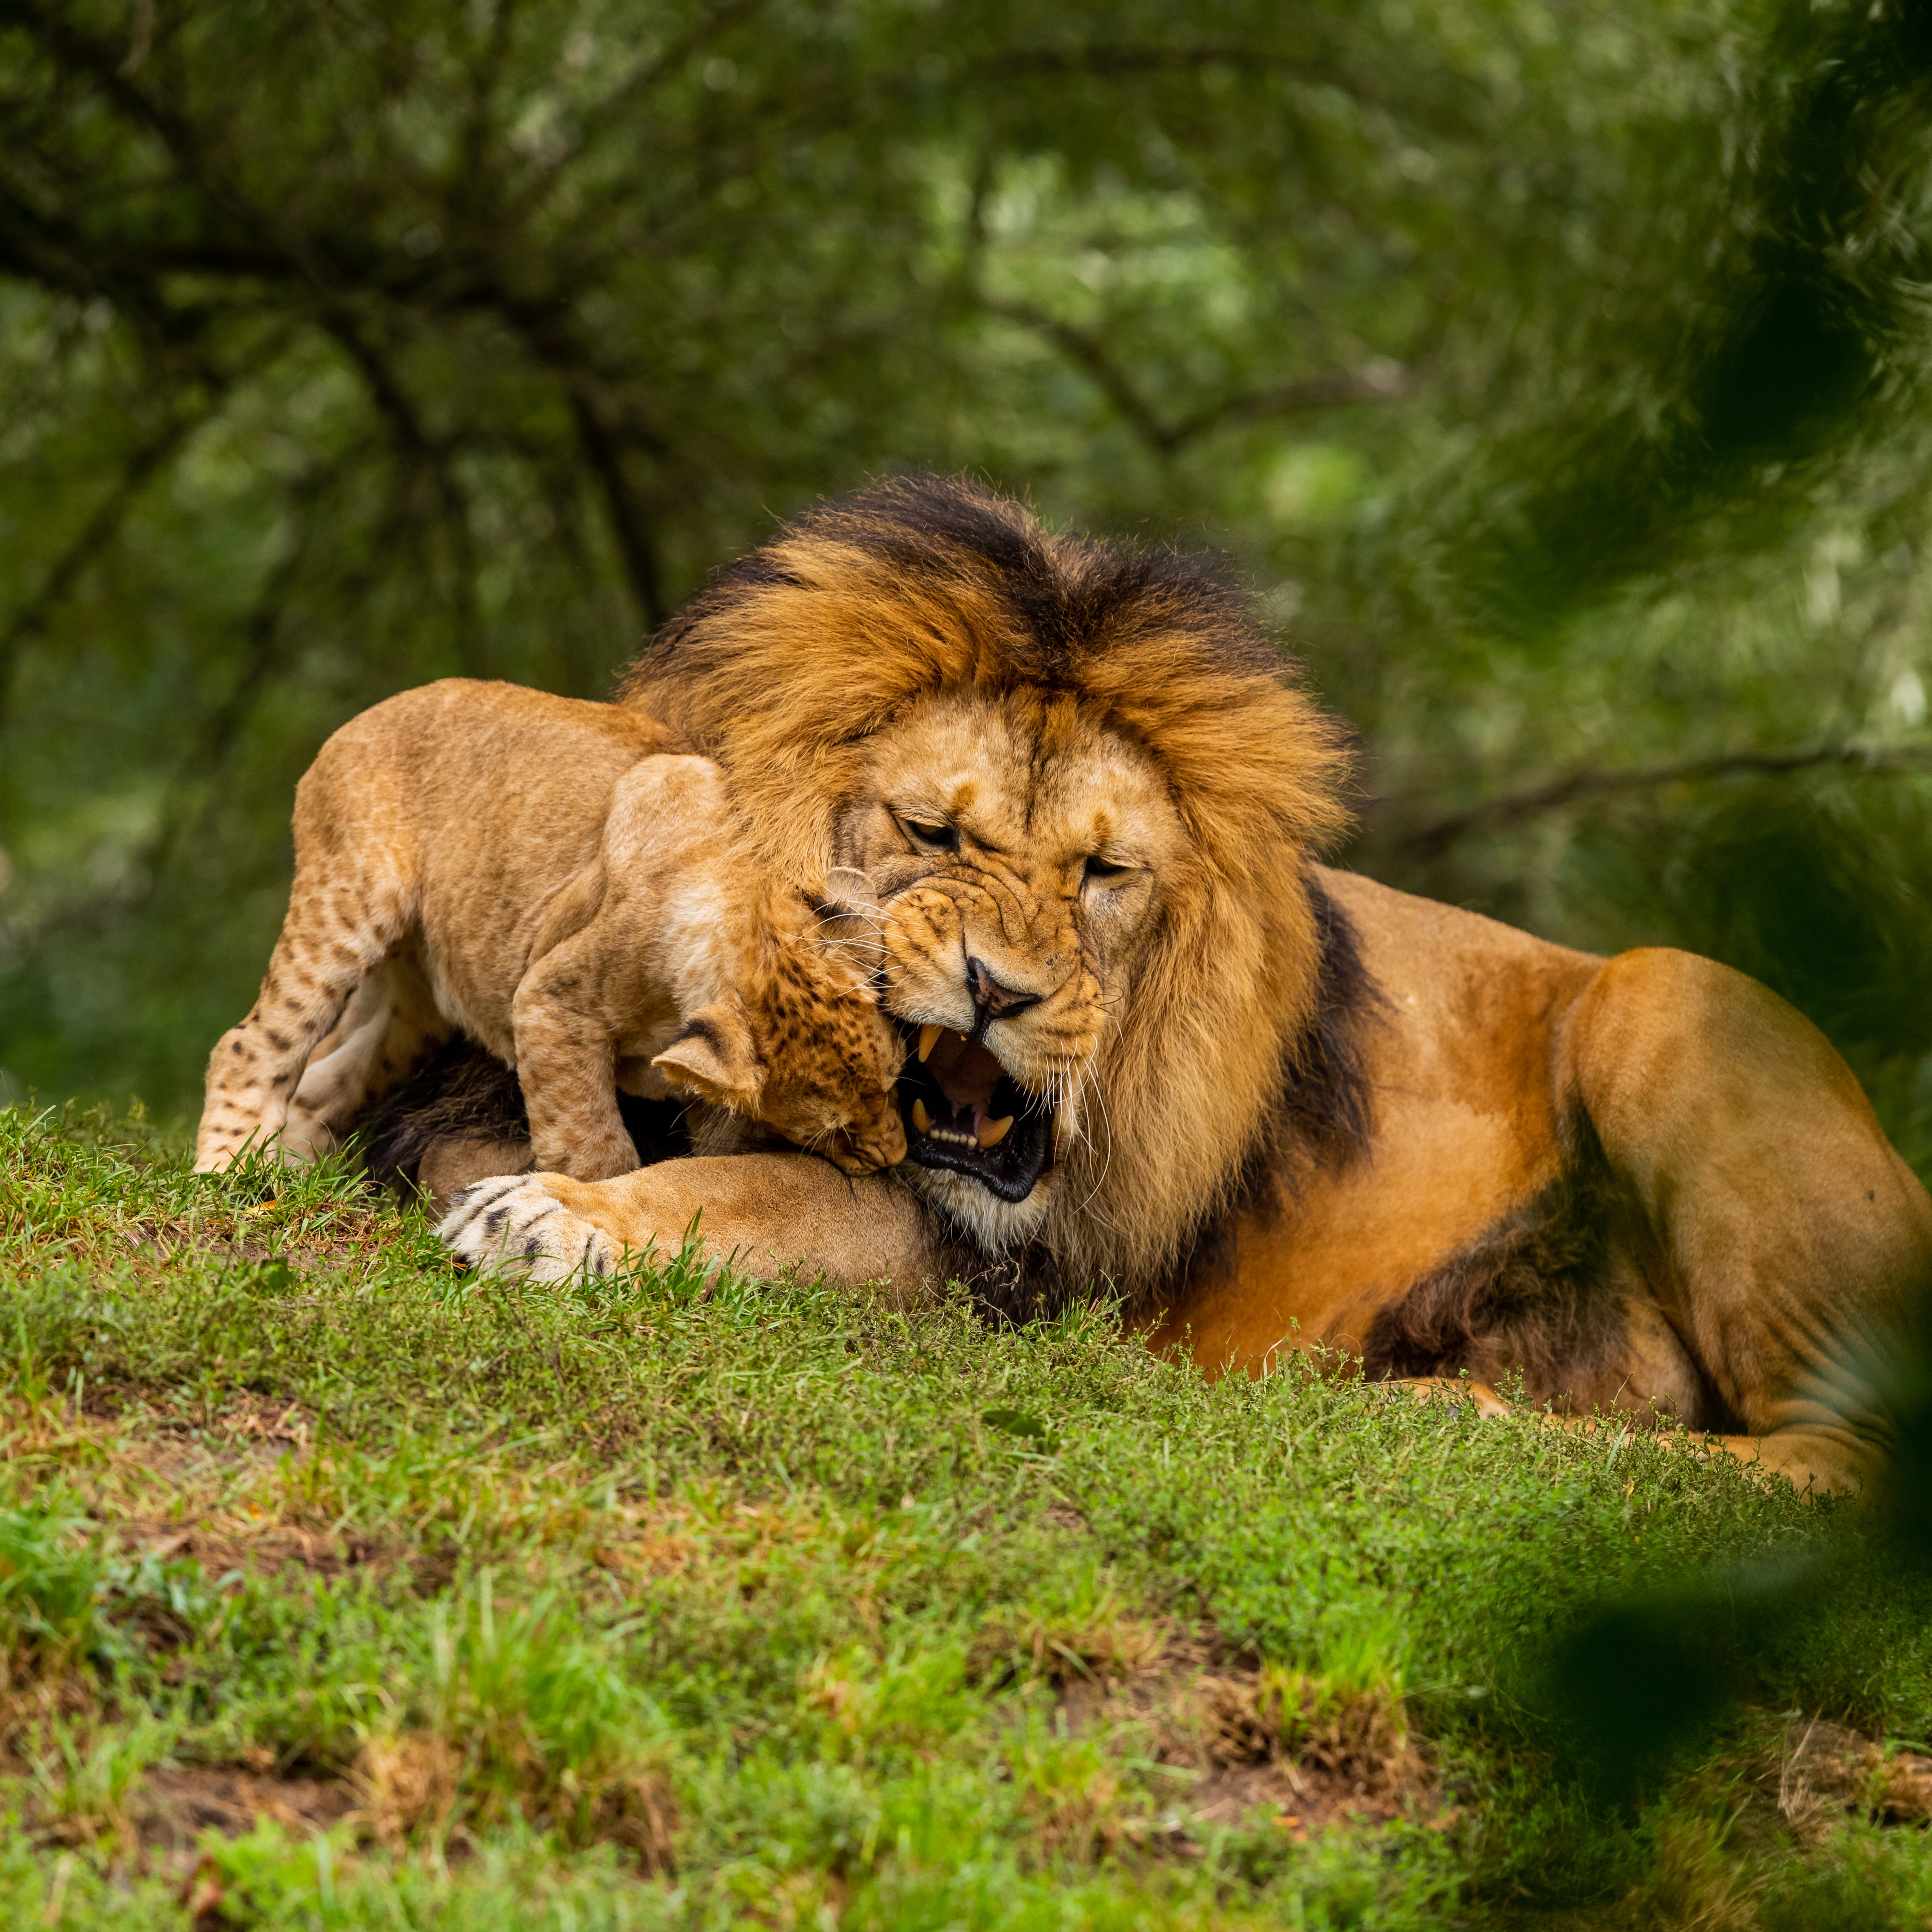 A lion lying on grass with a cub looking into his open mouth.